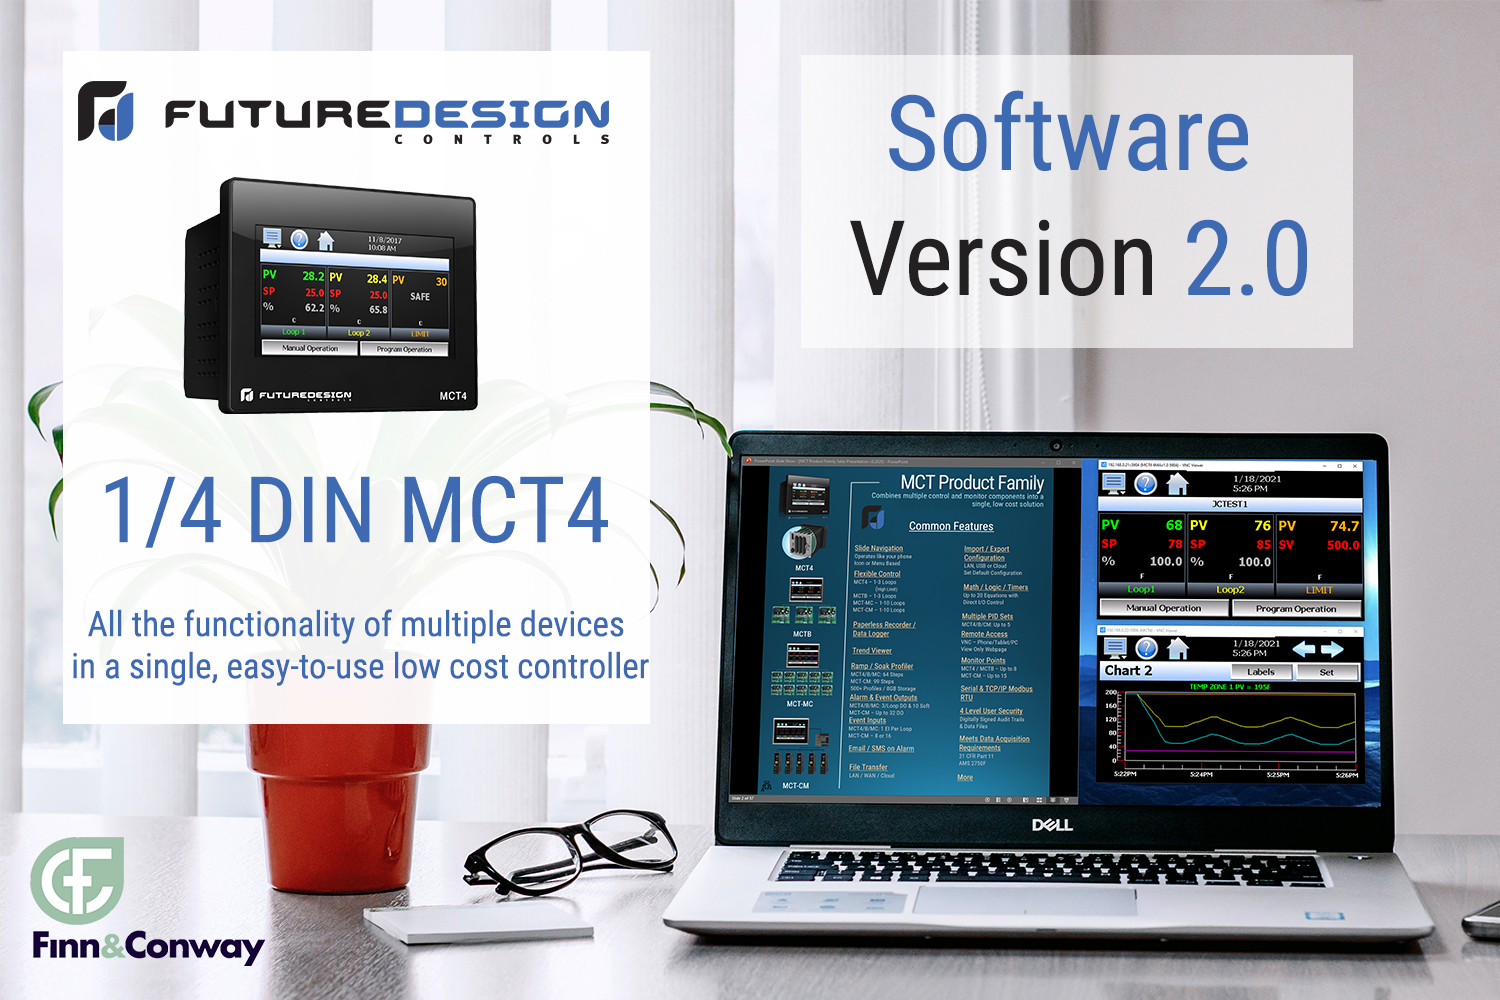 Software Version 2.0 of the 1/4 DIN MCT4